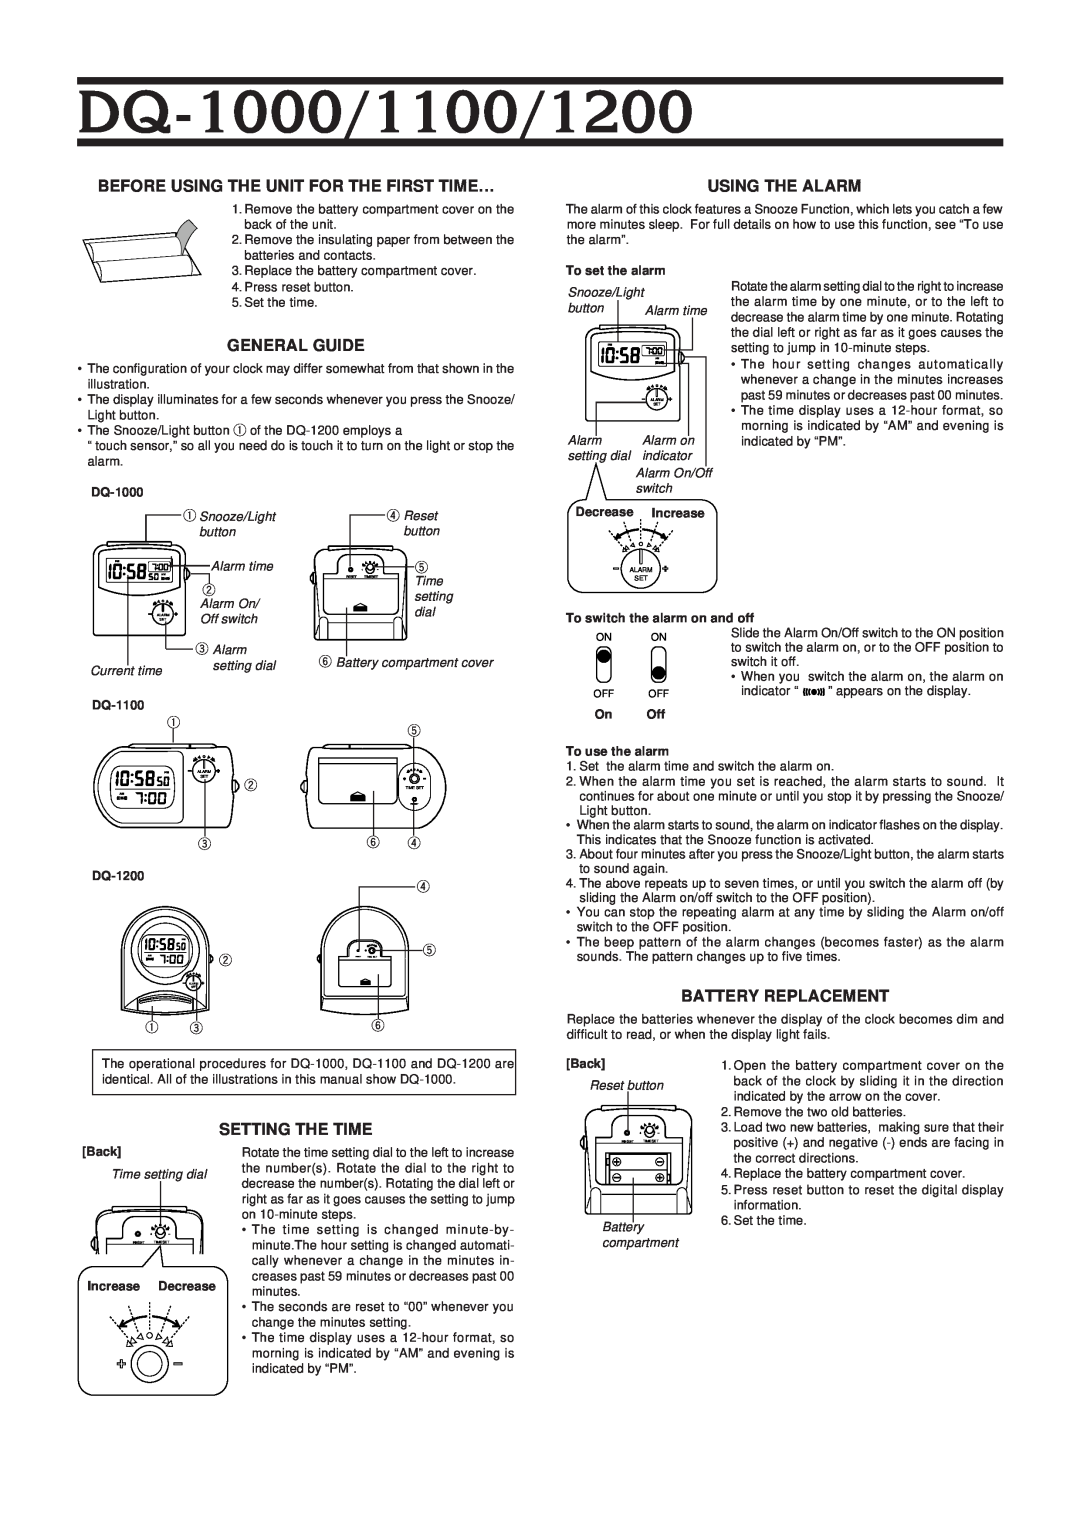 Casio DQ-1100, DQ-1200 manual DQ-1000/1100/1200, Before Using The Unit For The First Time…, Using The Alarm, General Guide 